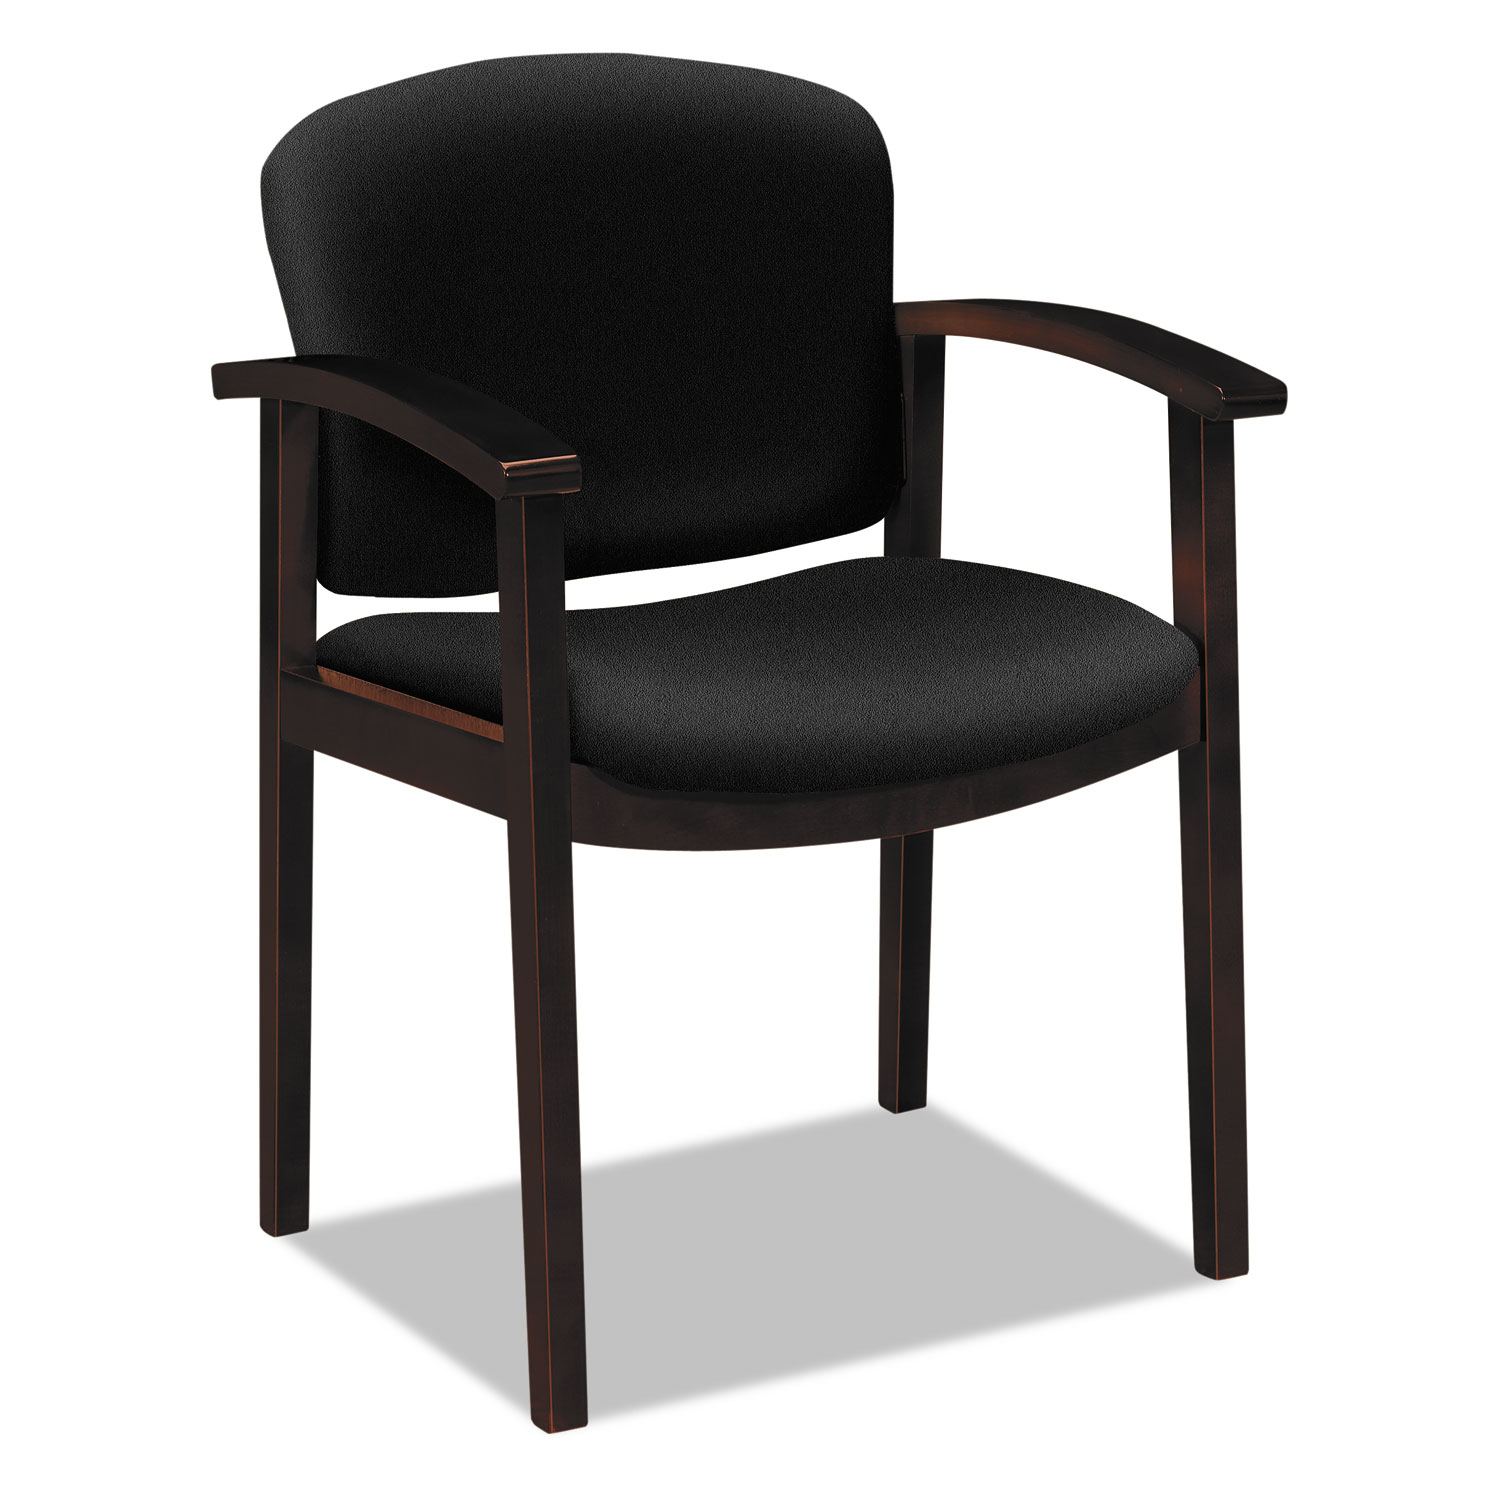 2111 Invitation Reception Series Wood Guest Chair, Mahogany/Solid Black Fabric